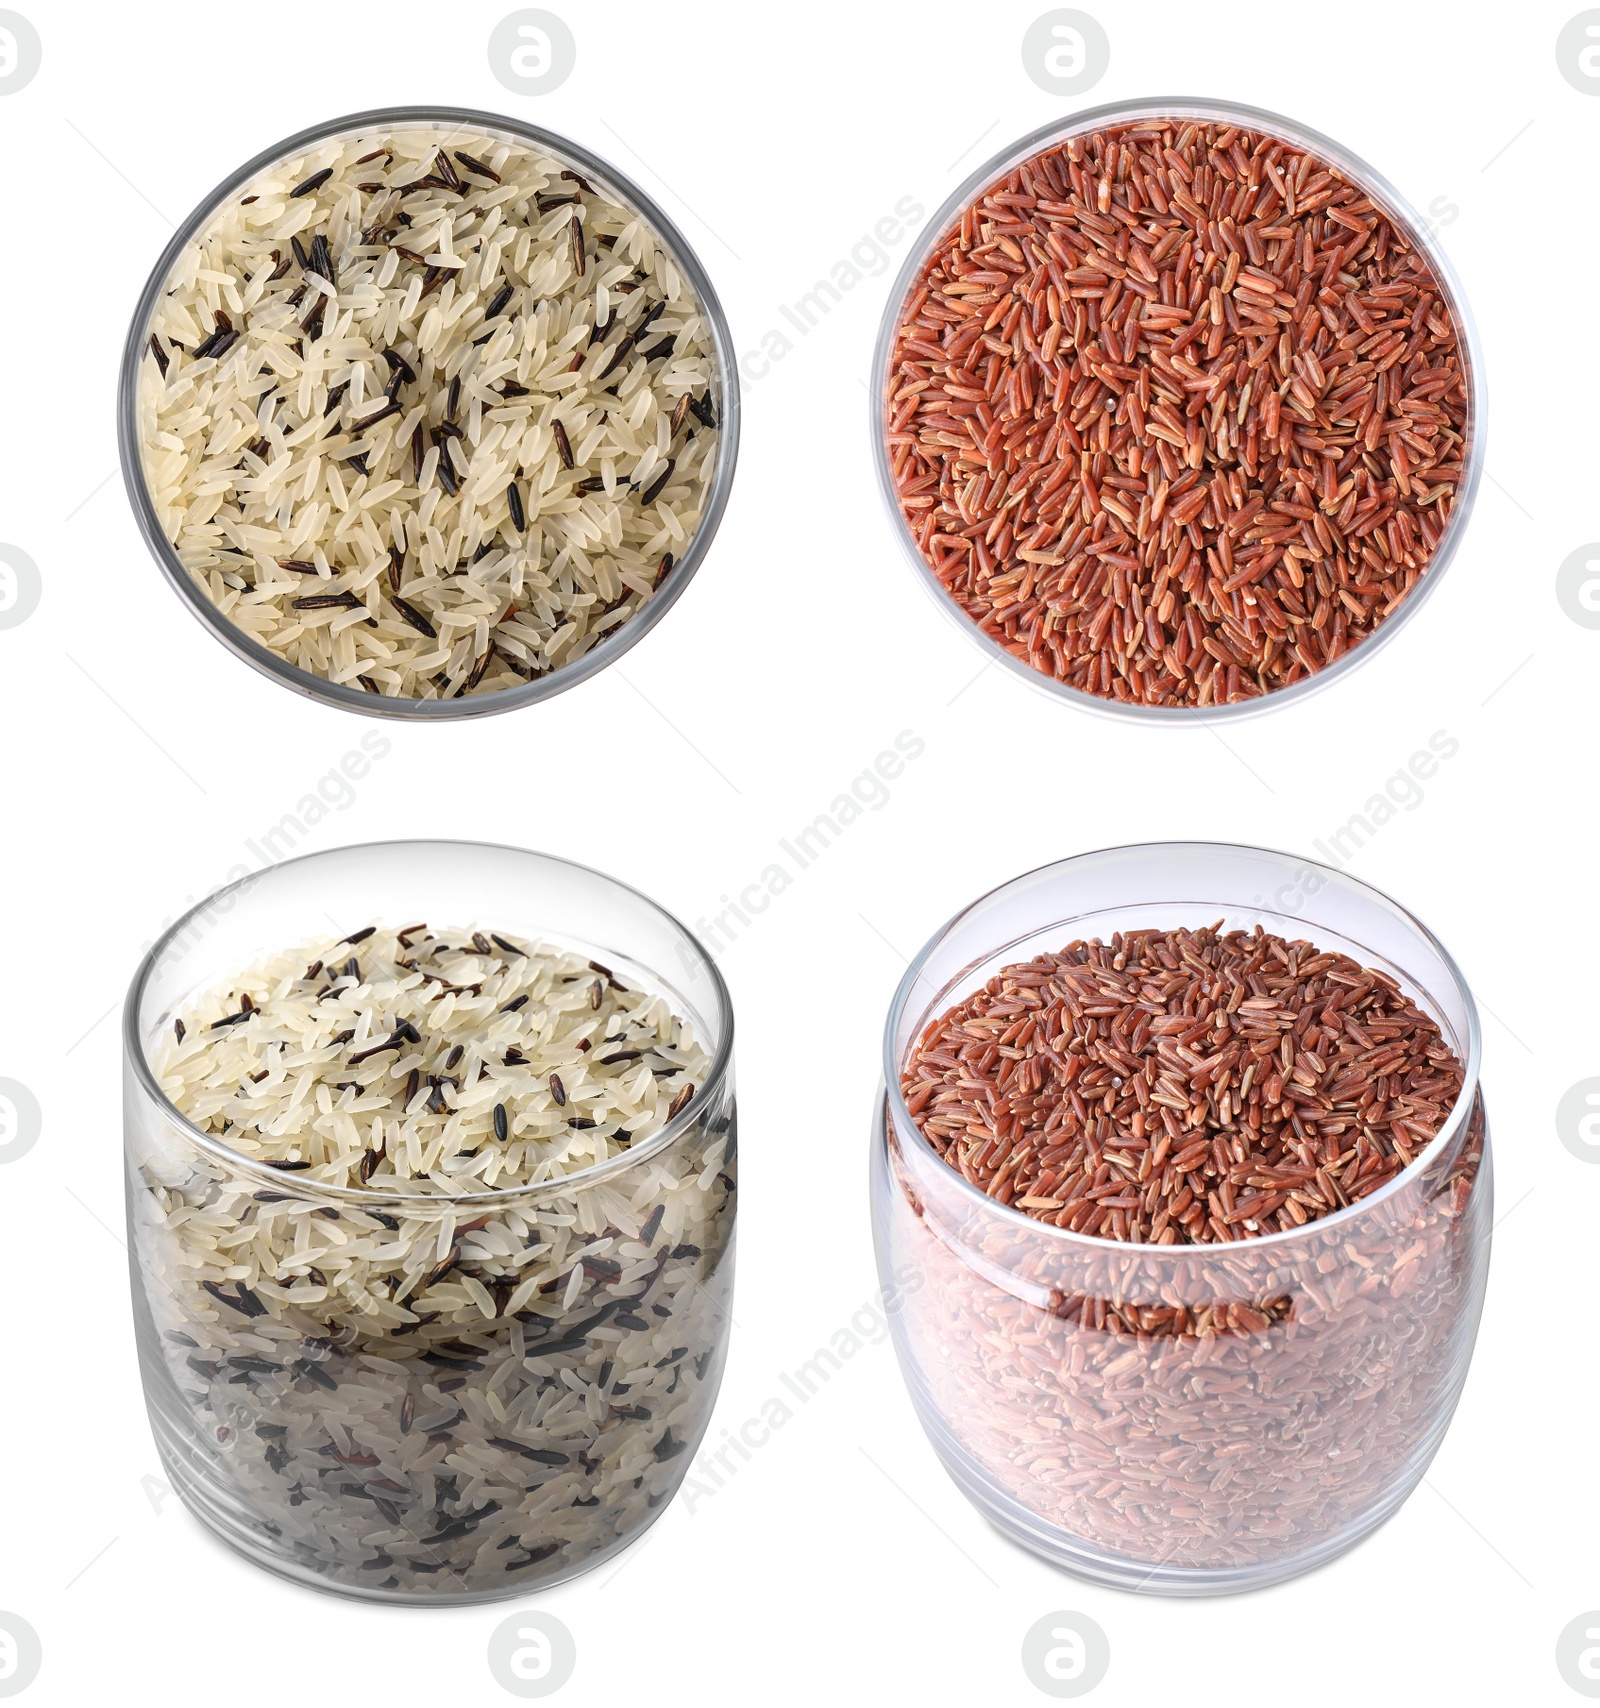 Image of Set with types of rice in jars on white background